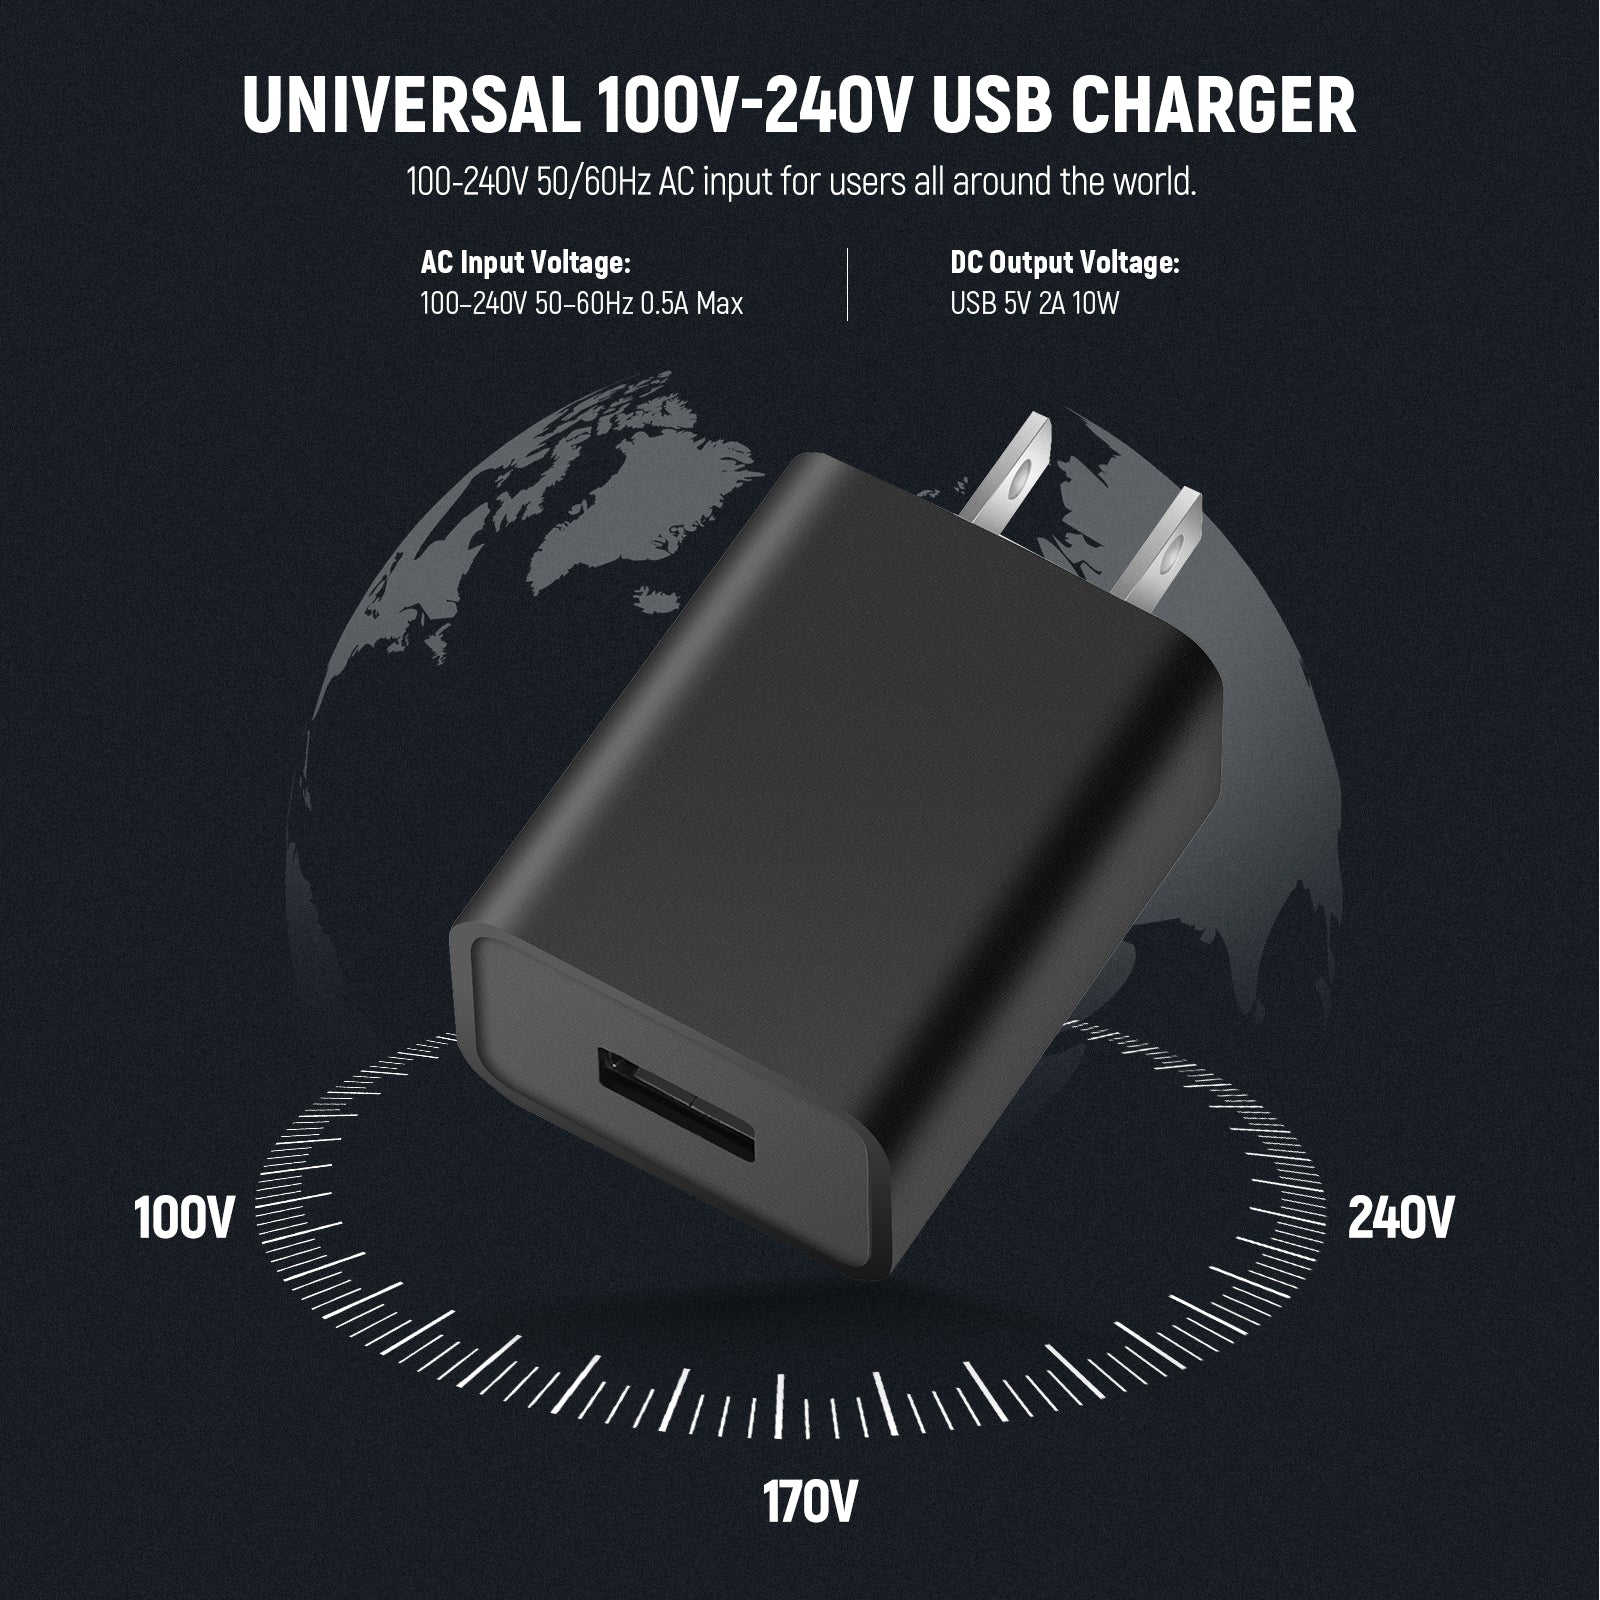 NEEWER 10W 5V 2A USB Power Adapter Charger for NEEWER Lights